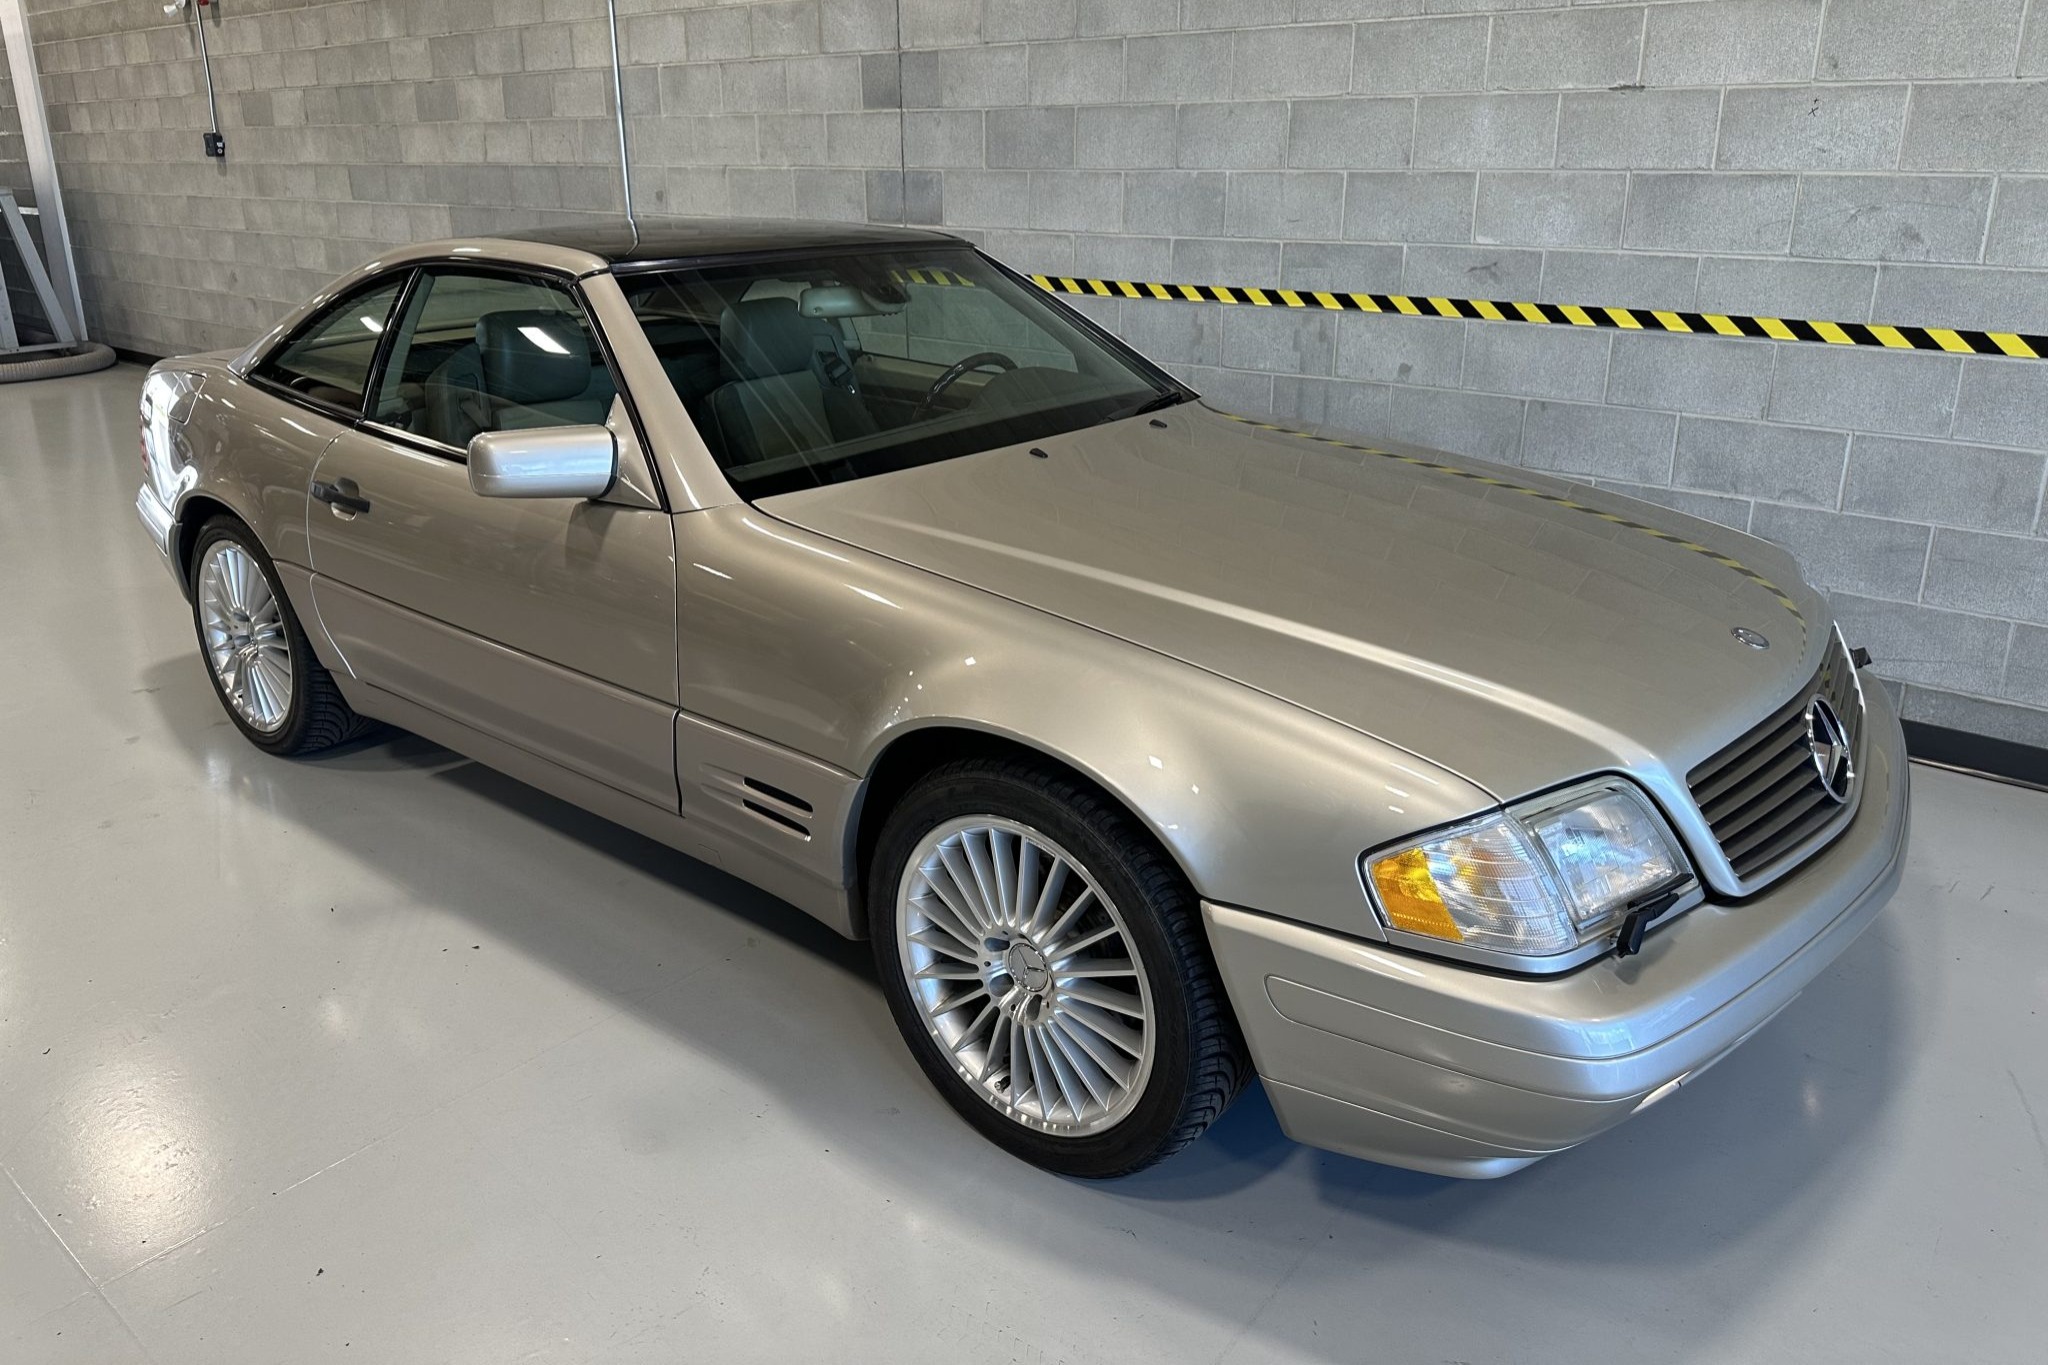 Used 1997 Mercedes-Benz SL500 Review